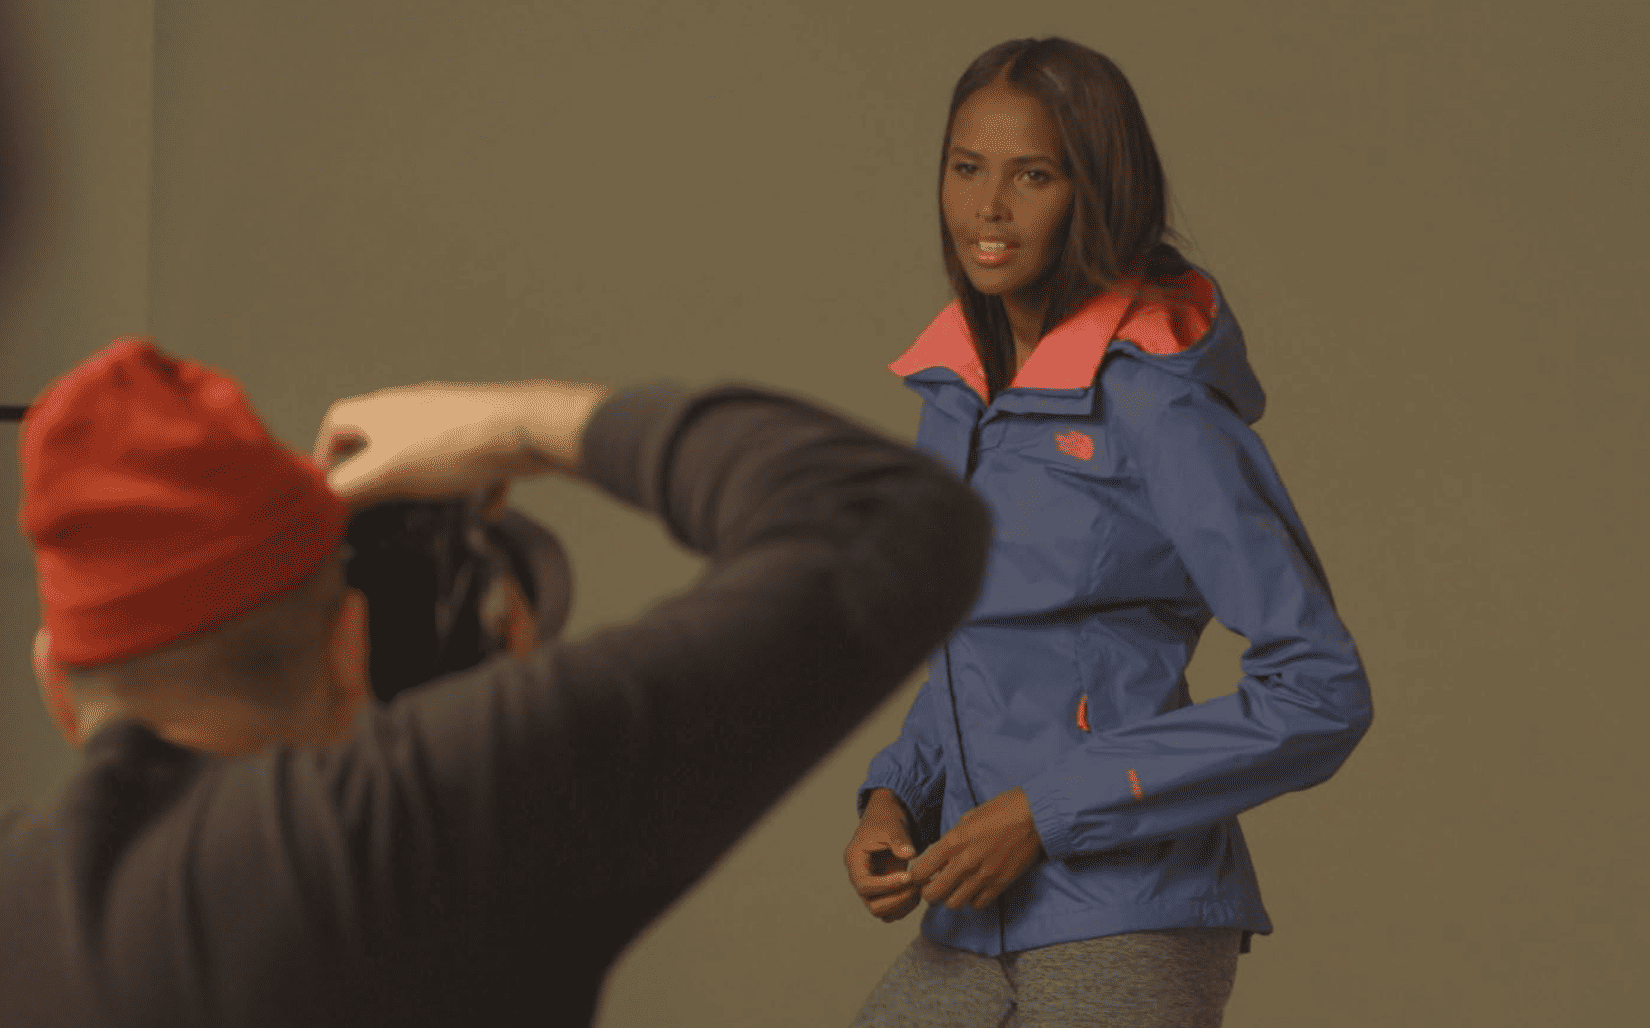 Ubah Hassan posing for a photoshoot as part of her self-titled documentary in this image from RadicalMedia.